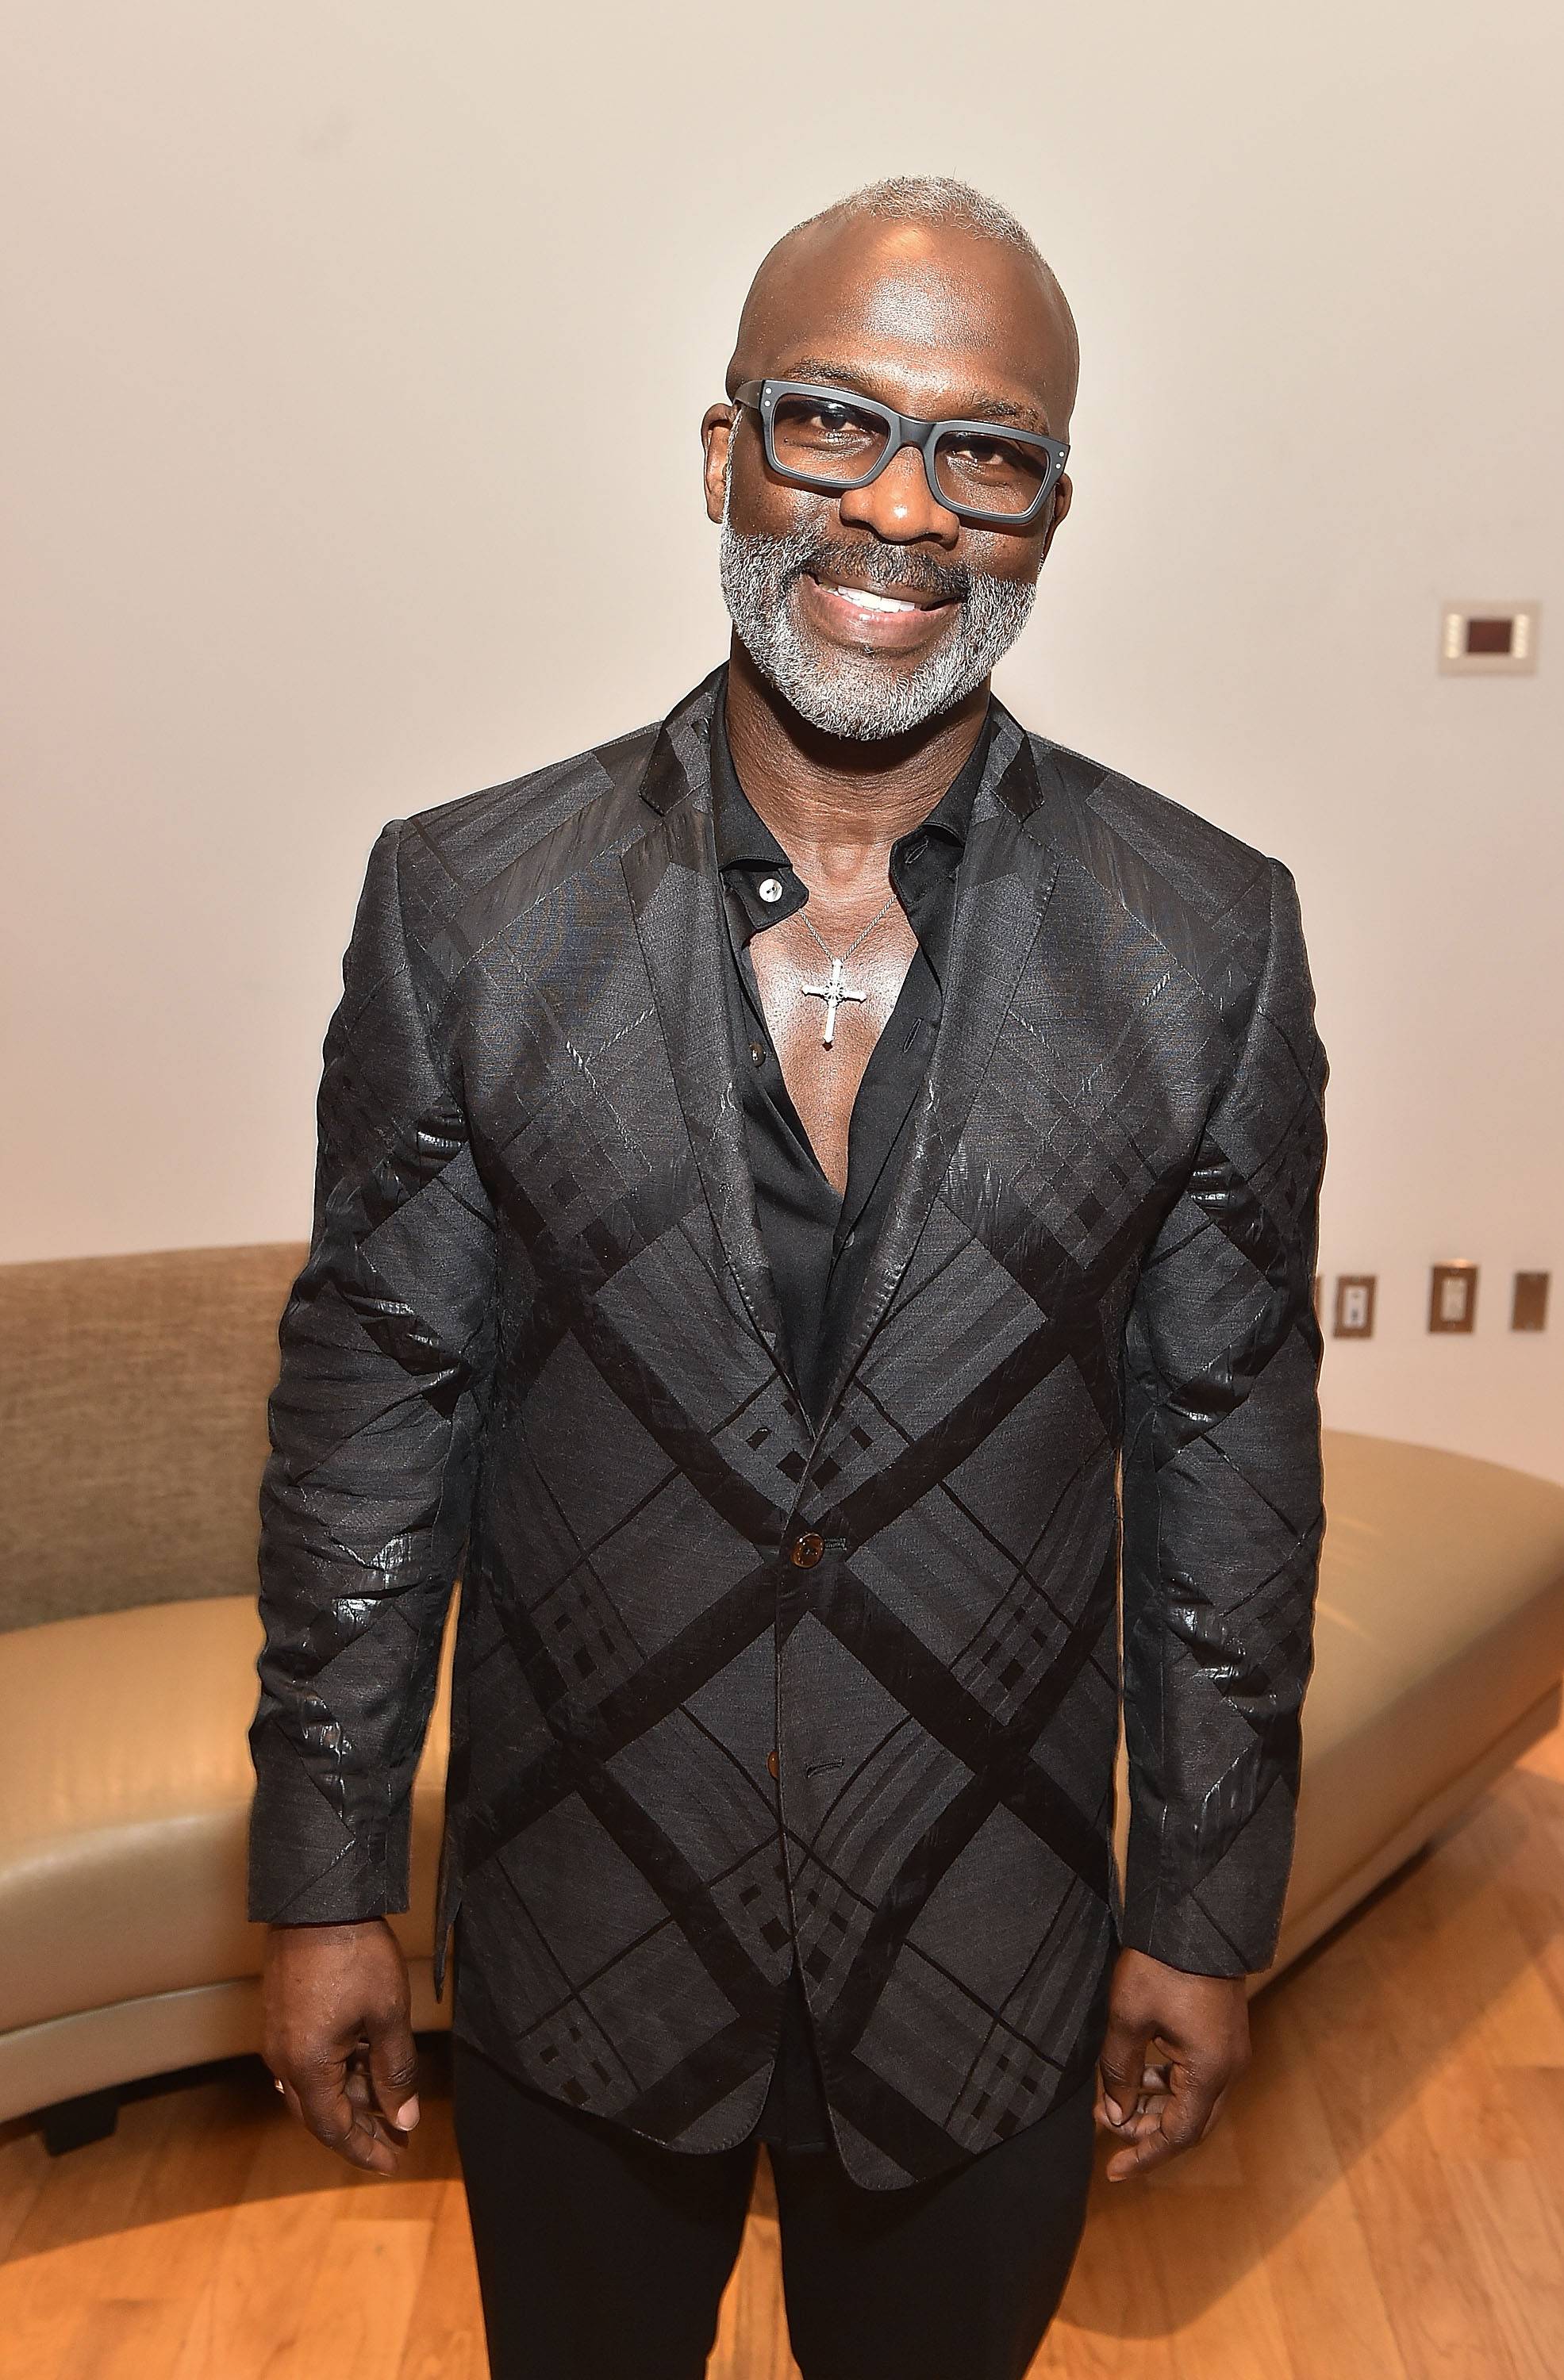 What A Time to Be Alive: The BeBe Winans Era